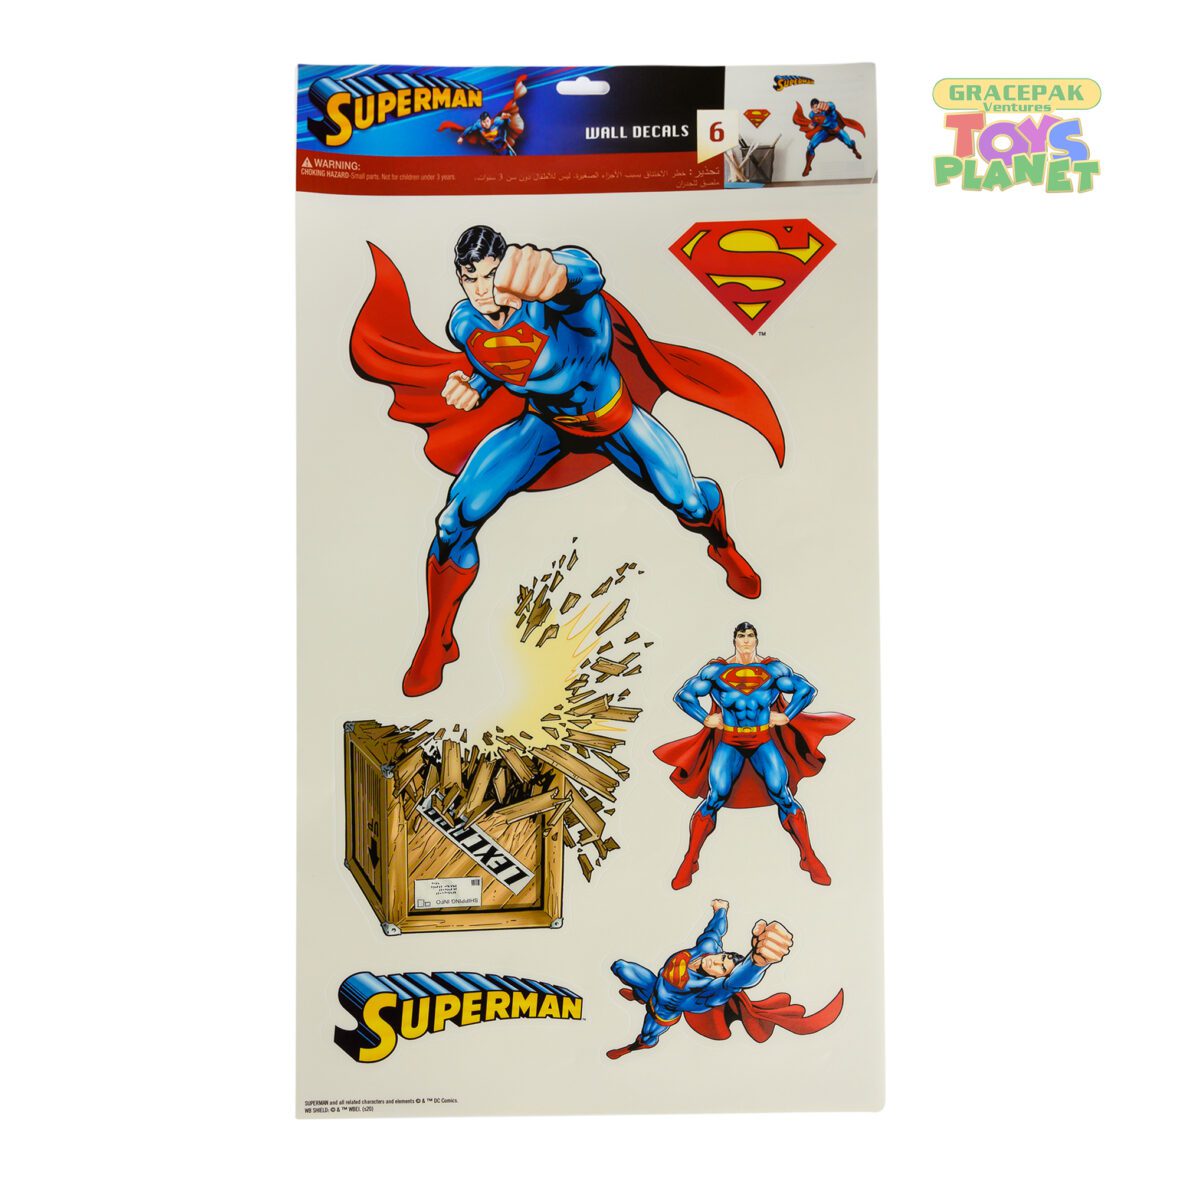 Superman Wall Decals